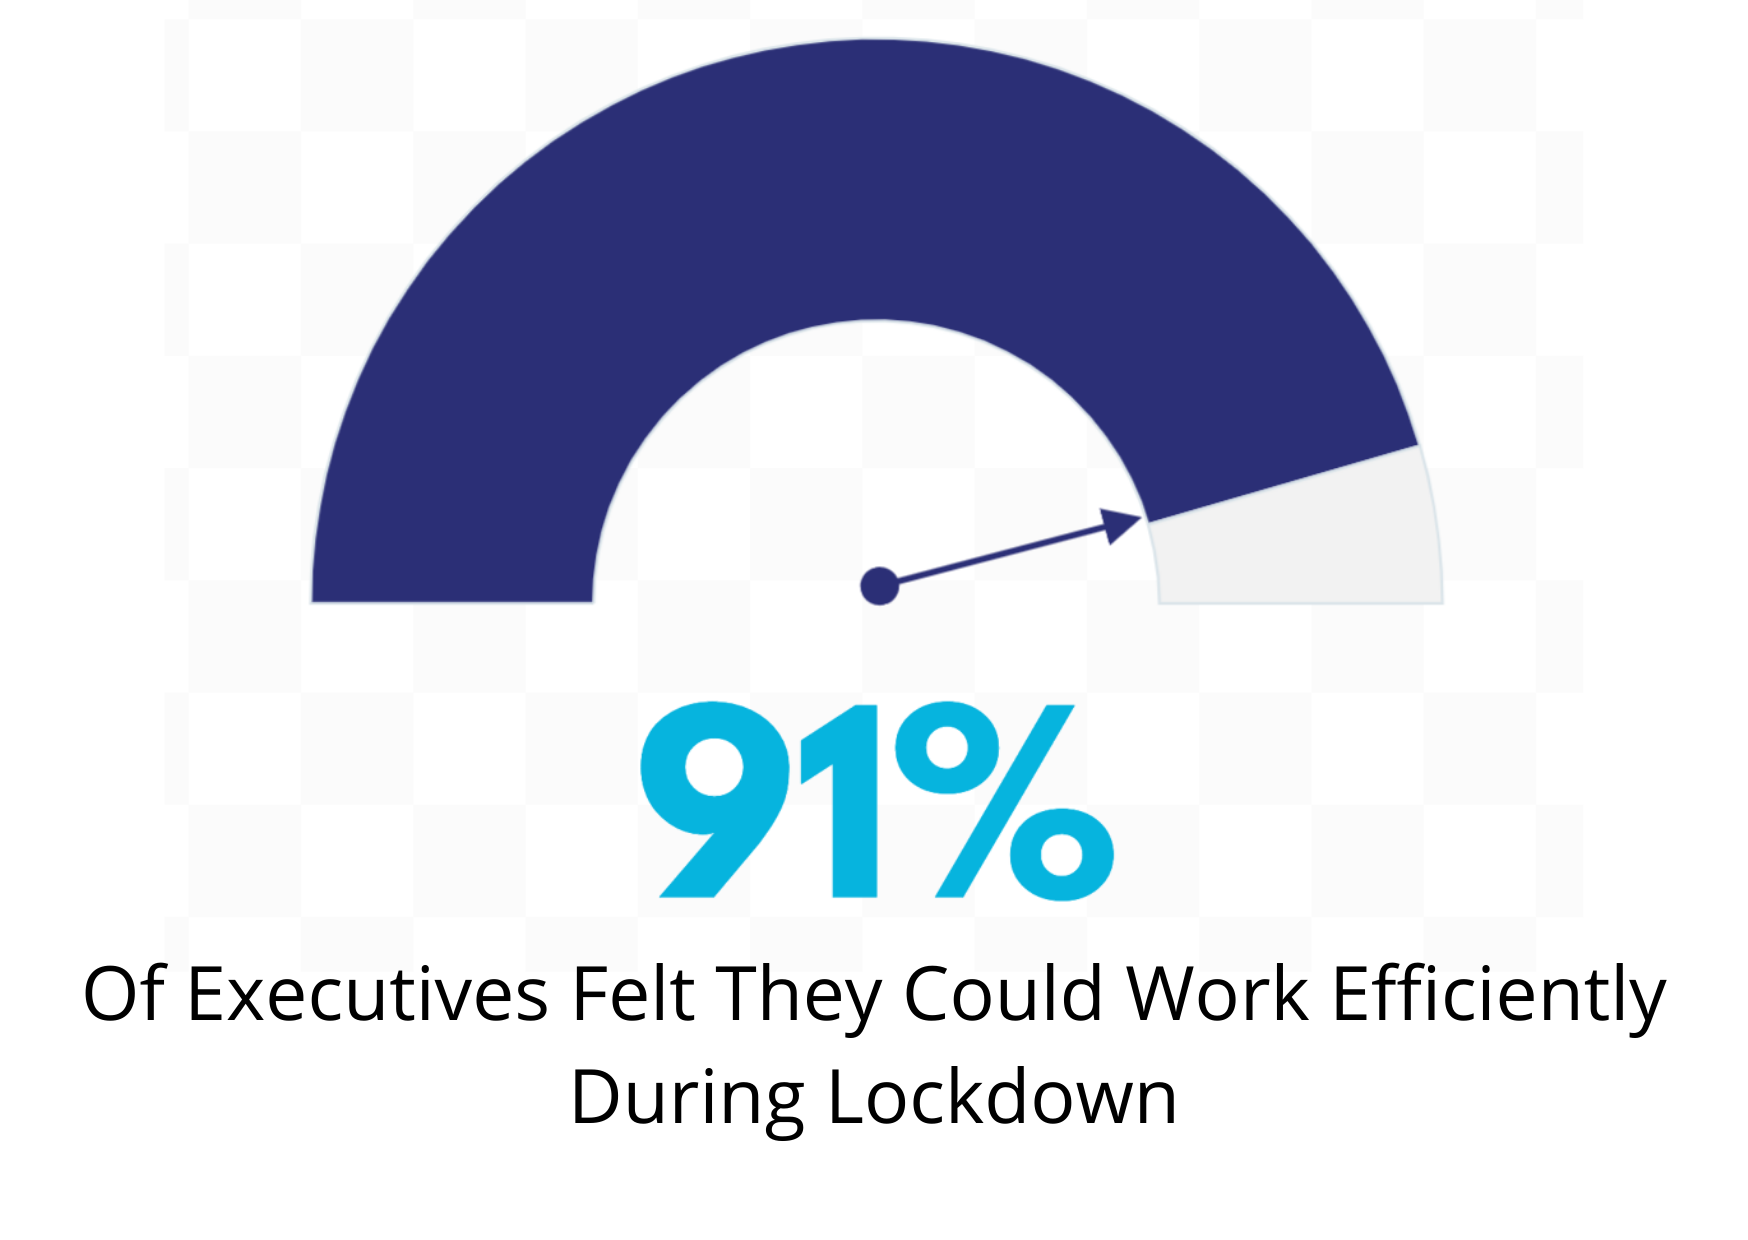 Of Executives Felt They Could Work Efficiently During Lockdown